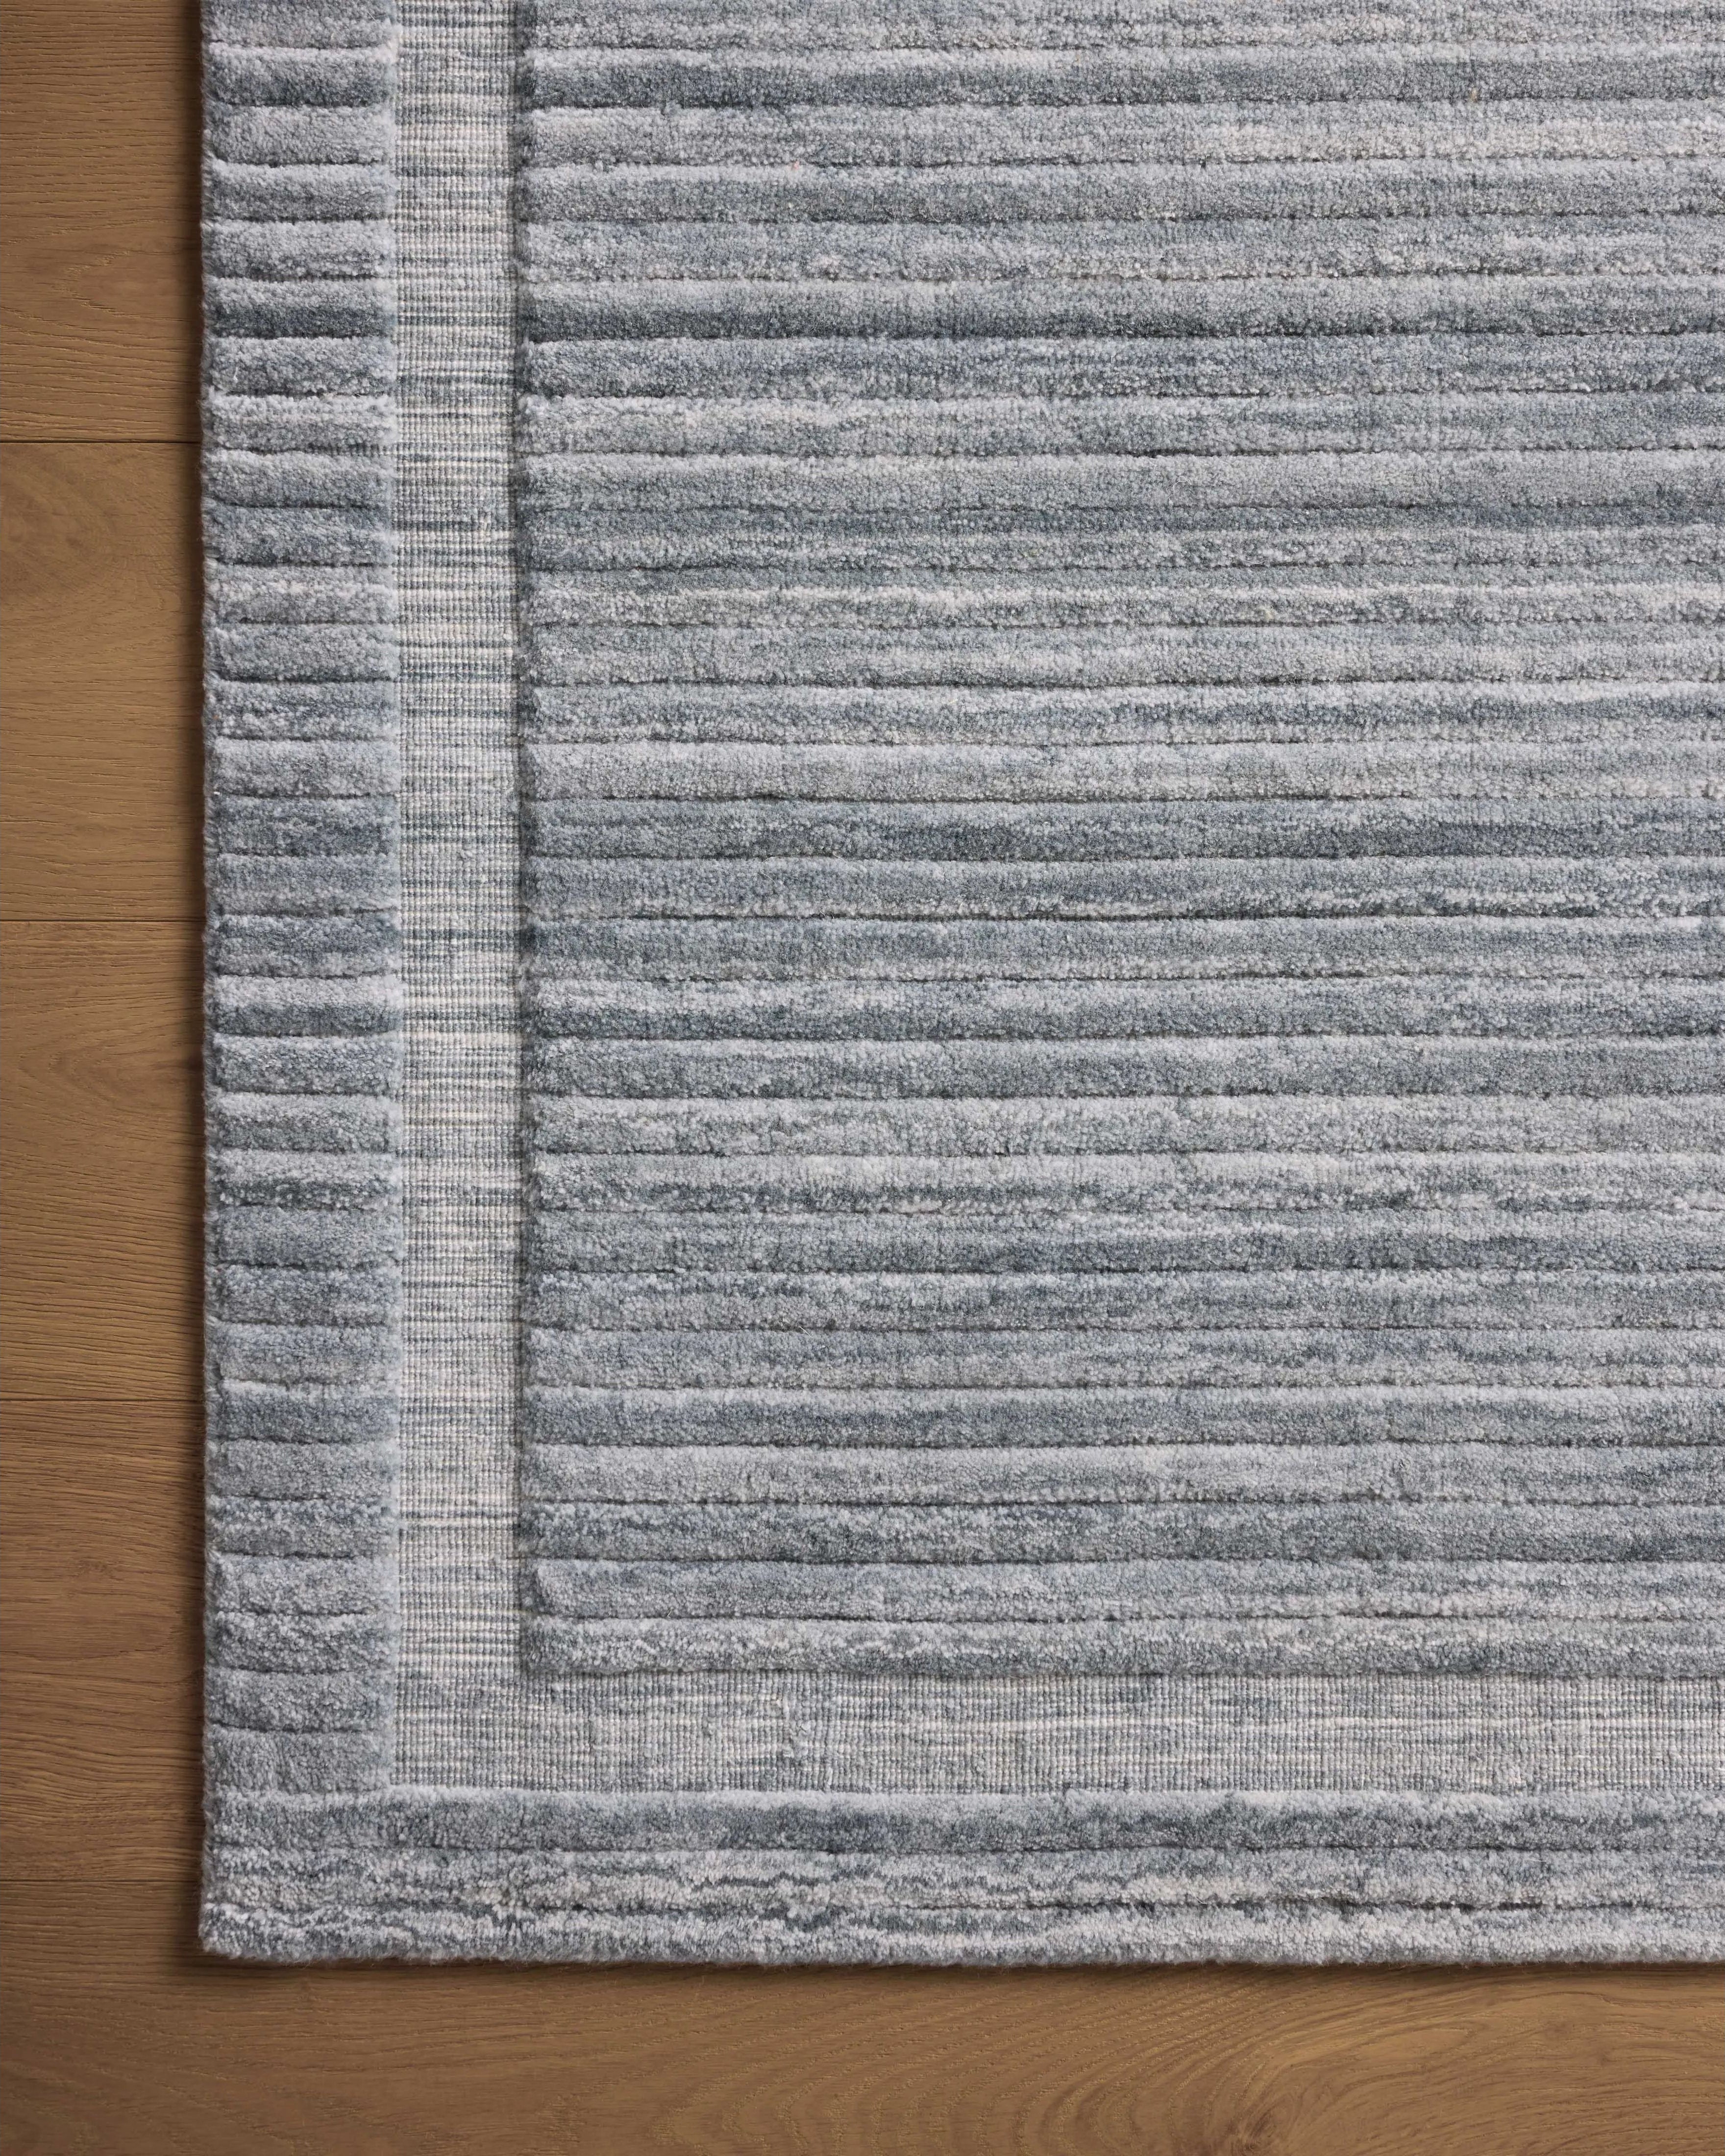 Irresistible to walk upon, the Dana Denim Rug by Brigette Romanek x Loloi has a high-low texture that alternates between a subtly shaggy pile and a soft base. Horizontal broken stripes give the area rug a fresh and energized structure, while a finish of fringe along the edges accentuates its sense of movement. Amethyst Home provides interior design, new home construction design consulting, vintage area rugs, and lighting in the Des Moines metro area.